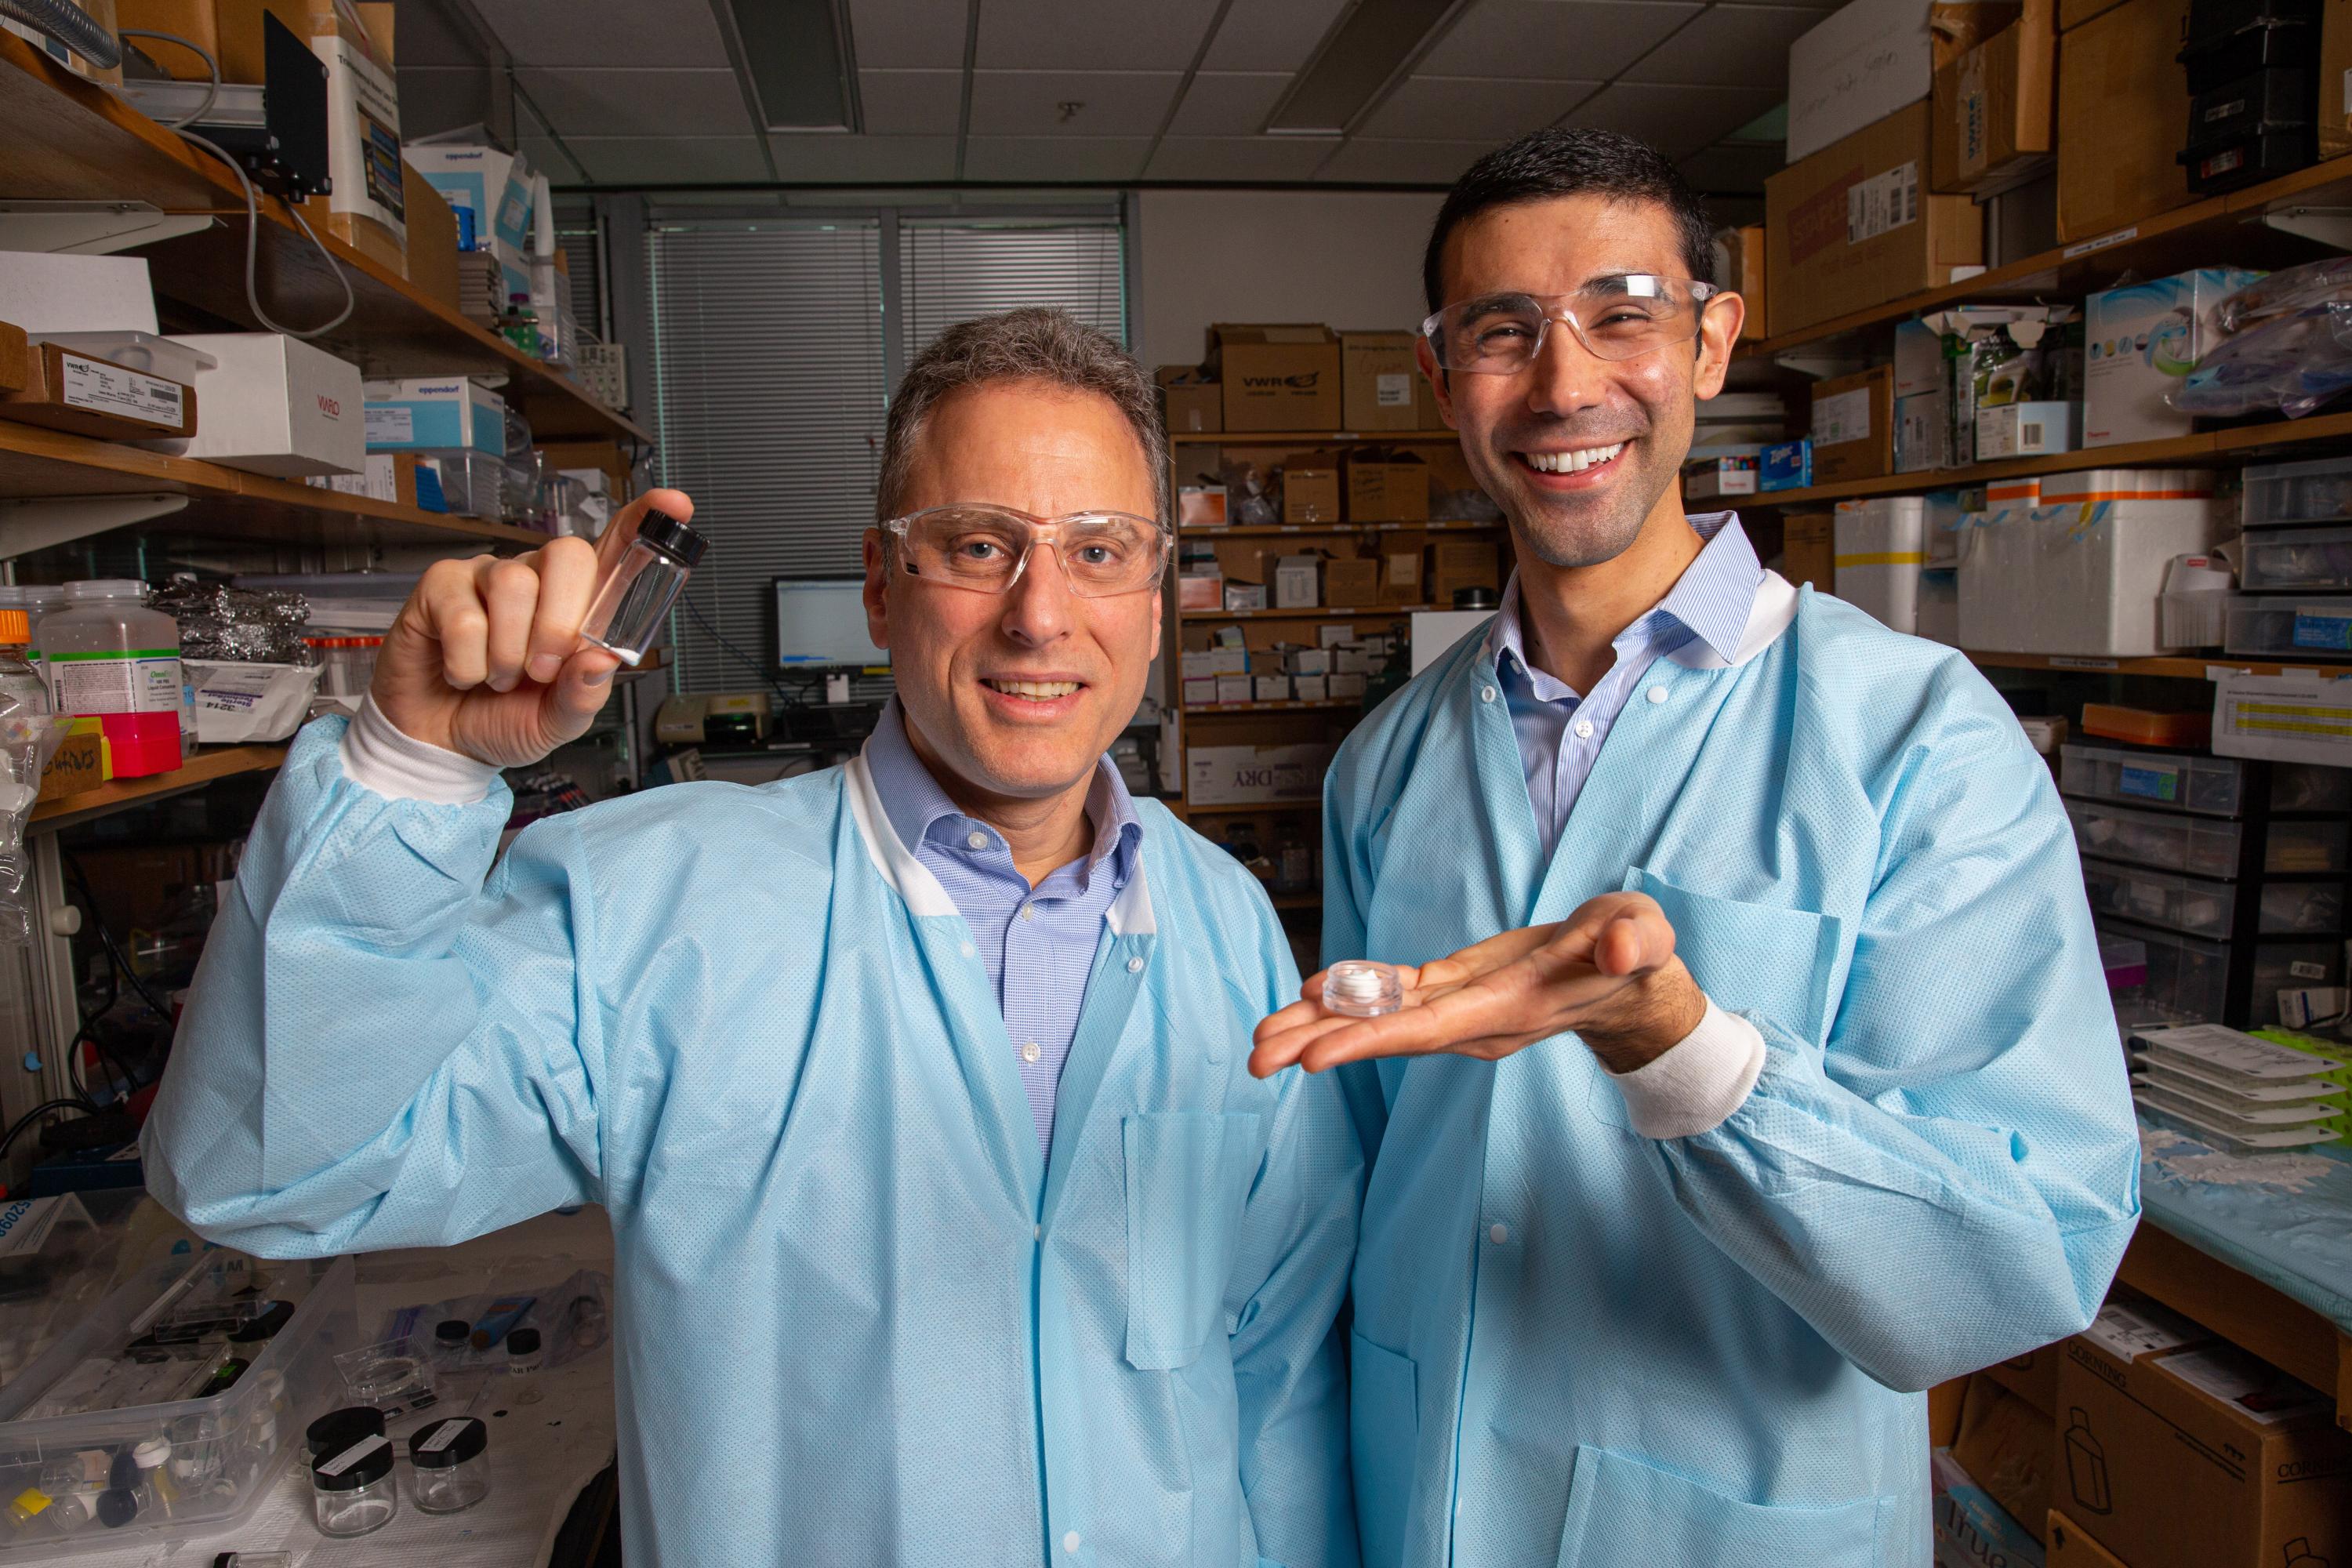 Georgia Tech Professor Mark Prausnitz and former Postdoctoral Scholar Andrew Tadros hold samples of the STAR particles, which could potentially facilitate better treatment of skin diseases including psoriasis, warts, and certain types of skin cancer. (Credit: Candler Hobbs, Georgia Tech)